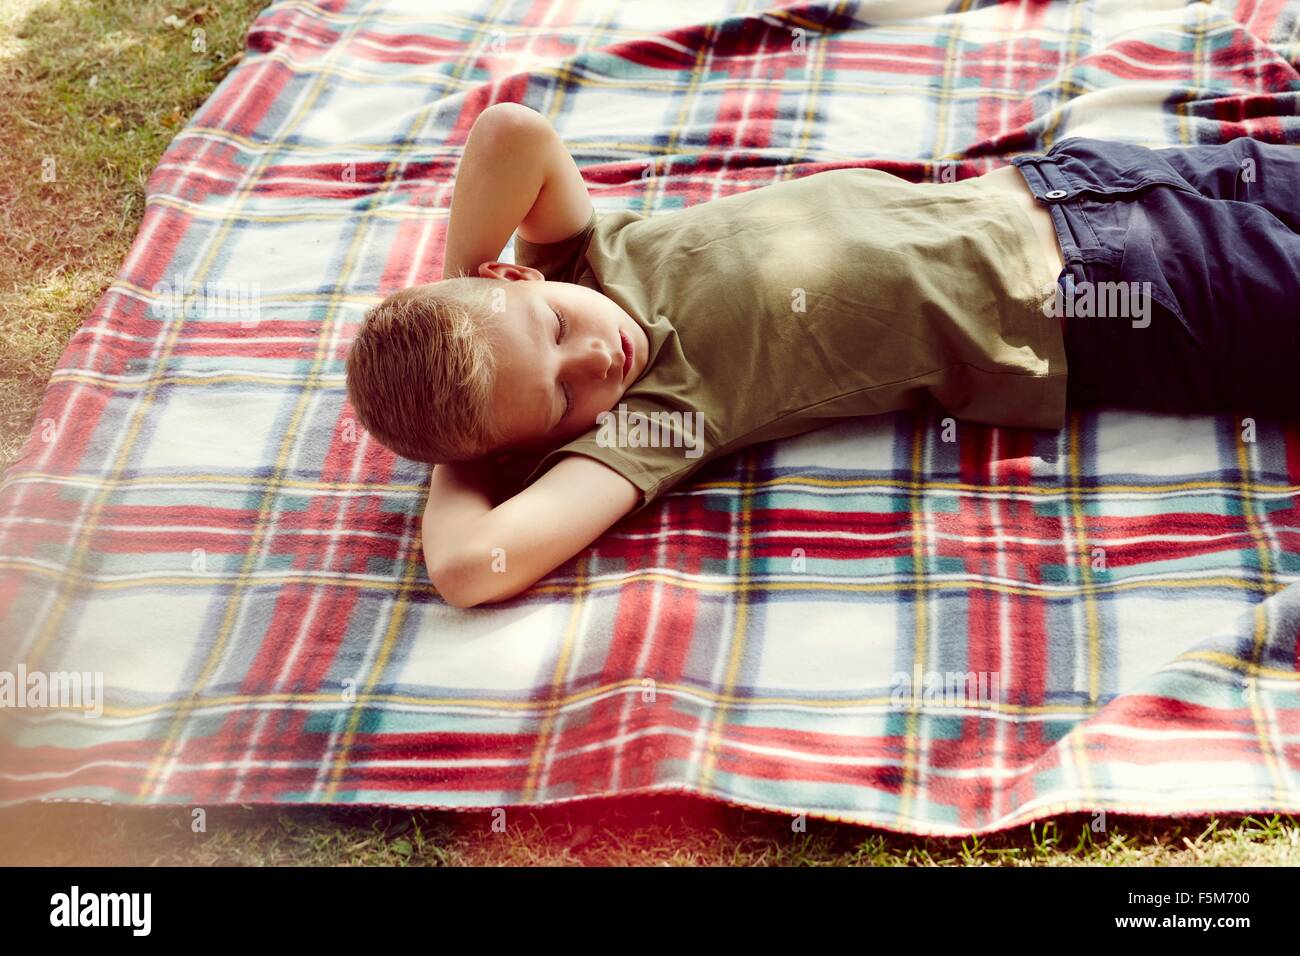 High angle view of boy lying on picnic blanket hands behind head looking away Stock Photo